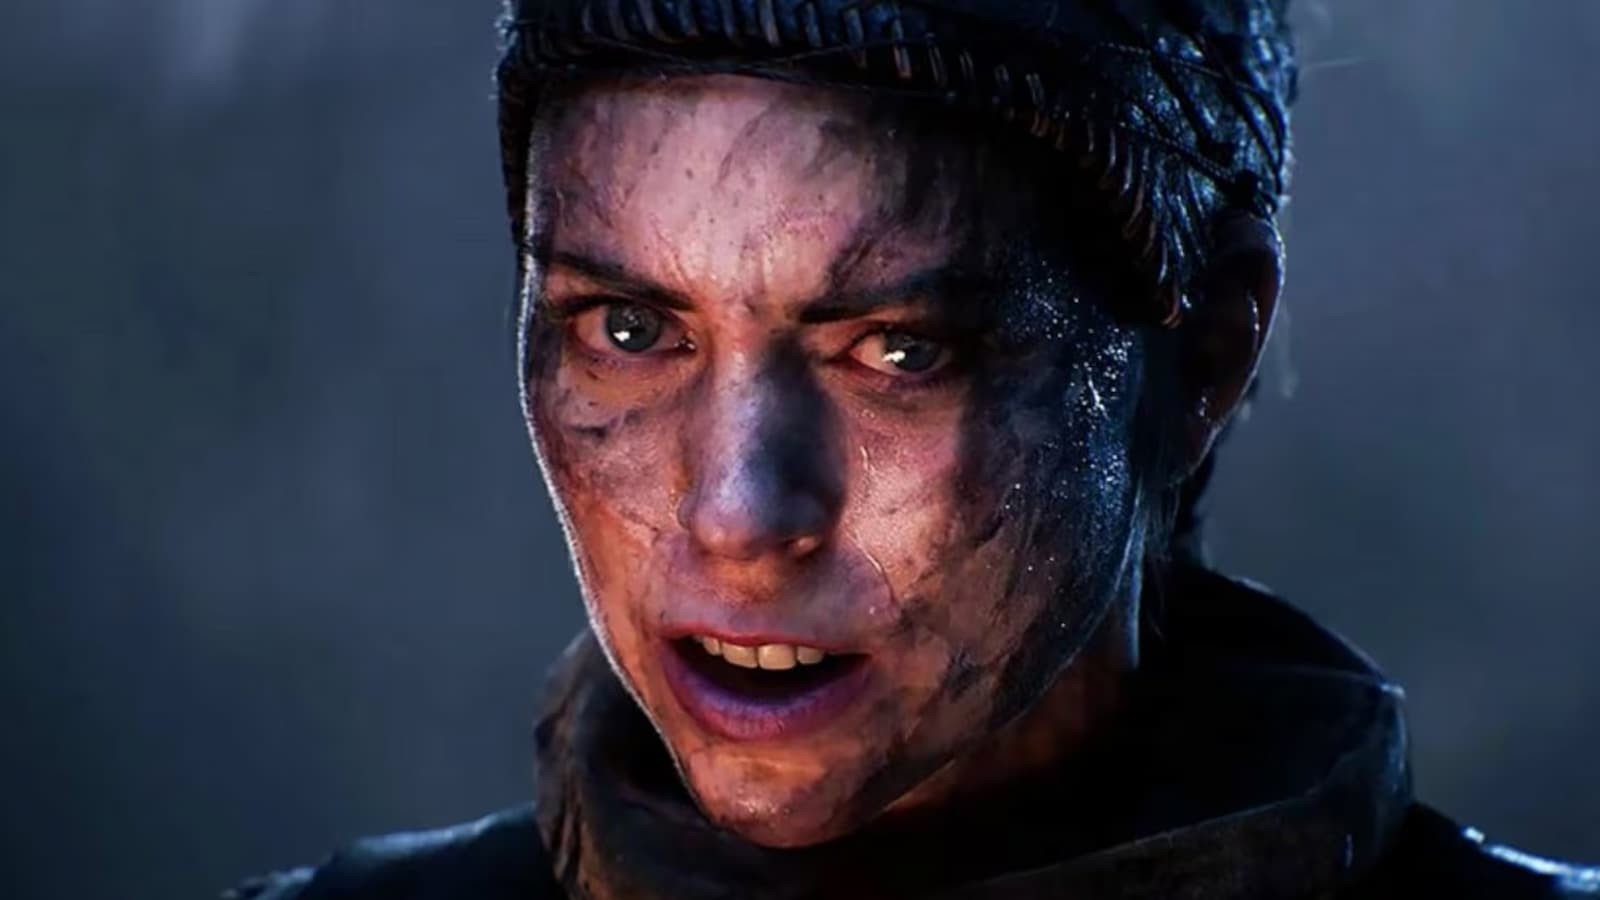 After the initial batch of four games, Hellblade 2 is reportedly high up on the list for more multiplatform releases.